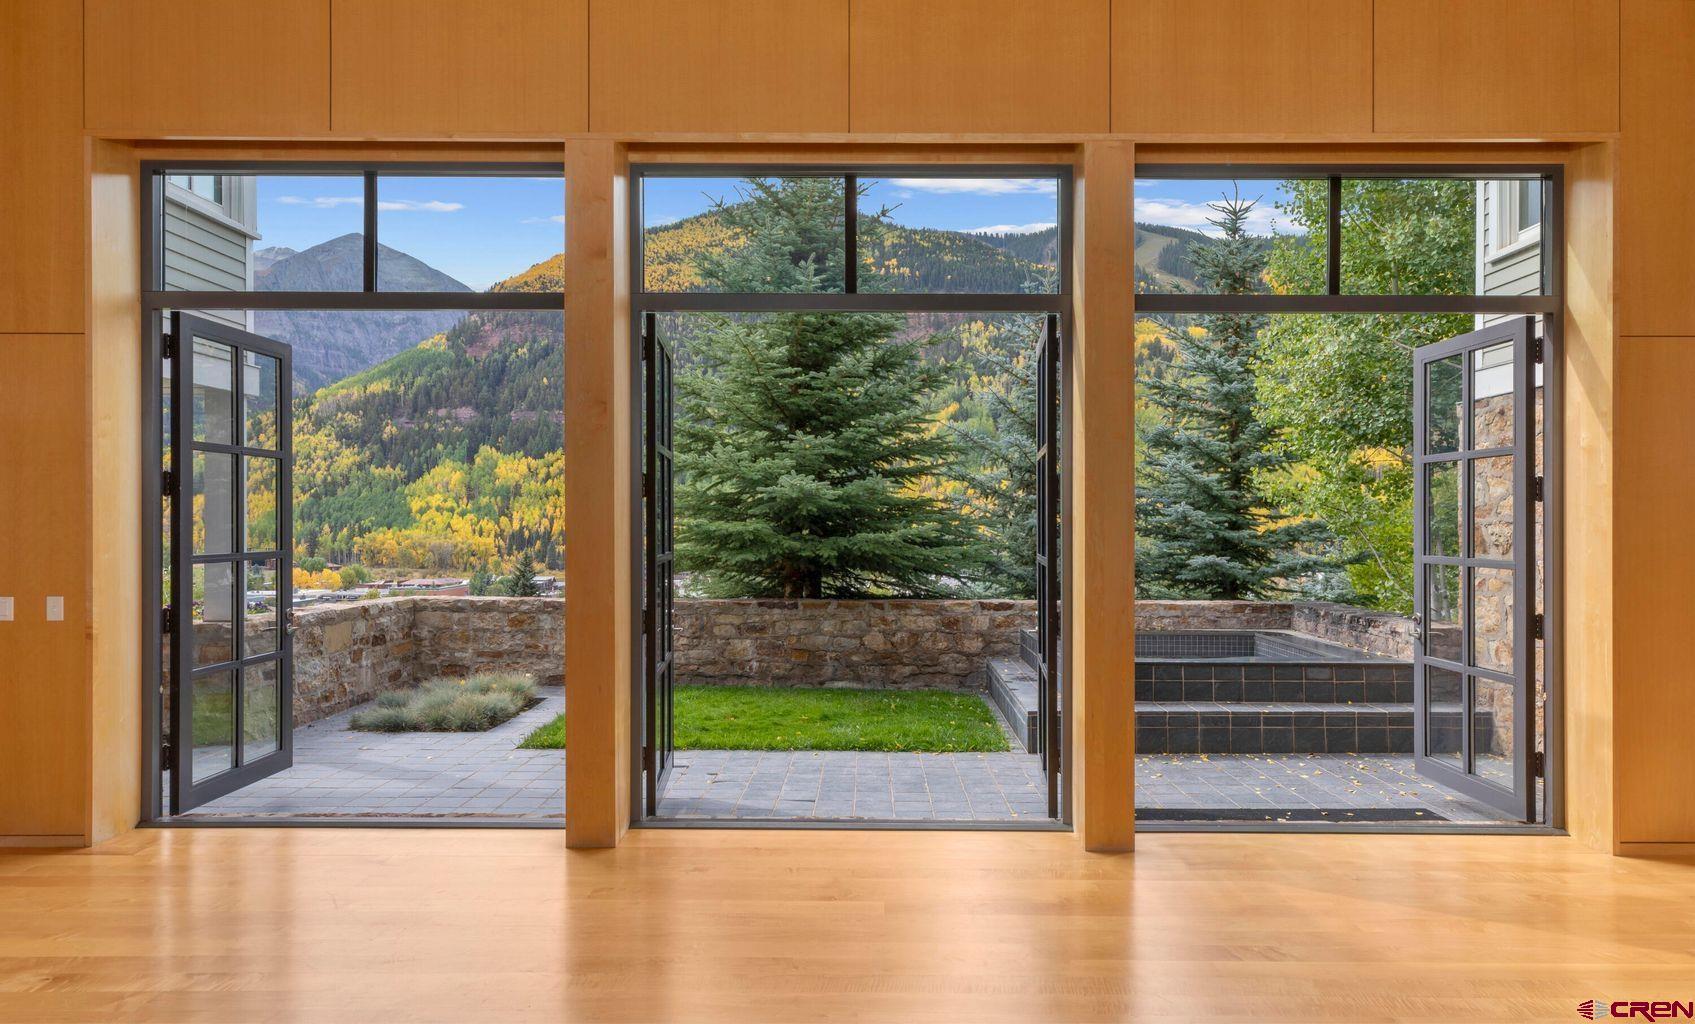 One of the most recognized & sought-after homes overlooking the storybook setting of historic downtown Telluride, this is the first time this wonderful town property has been available for purchase in over 15 years. Perched just above the Telluride Historical Museum on a landscaped bench of land occupying just under a very-rare half-acre, this home has been host to some of the community's most storied gatherings. Vaulted, light-filled spaces open to generous decks & sun-washed terraces with views from the canyon's waterfalls to Bear Creek Canyon, the Telluride Ski Area & out toward the Valley Floor. Between Main House & Guest House, you'll find 8 bedrooms, complemented by wonderful places to gather & entertain. Walk straight down N Oak St to skiing, shops & restaurants